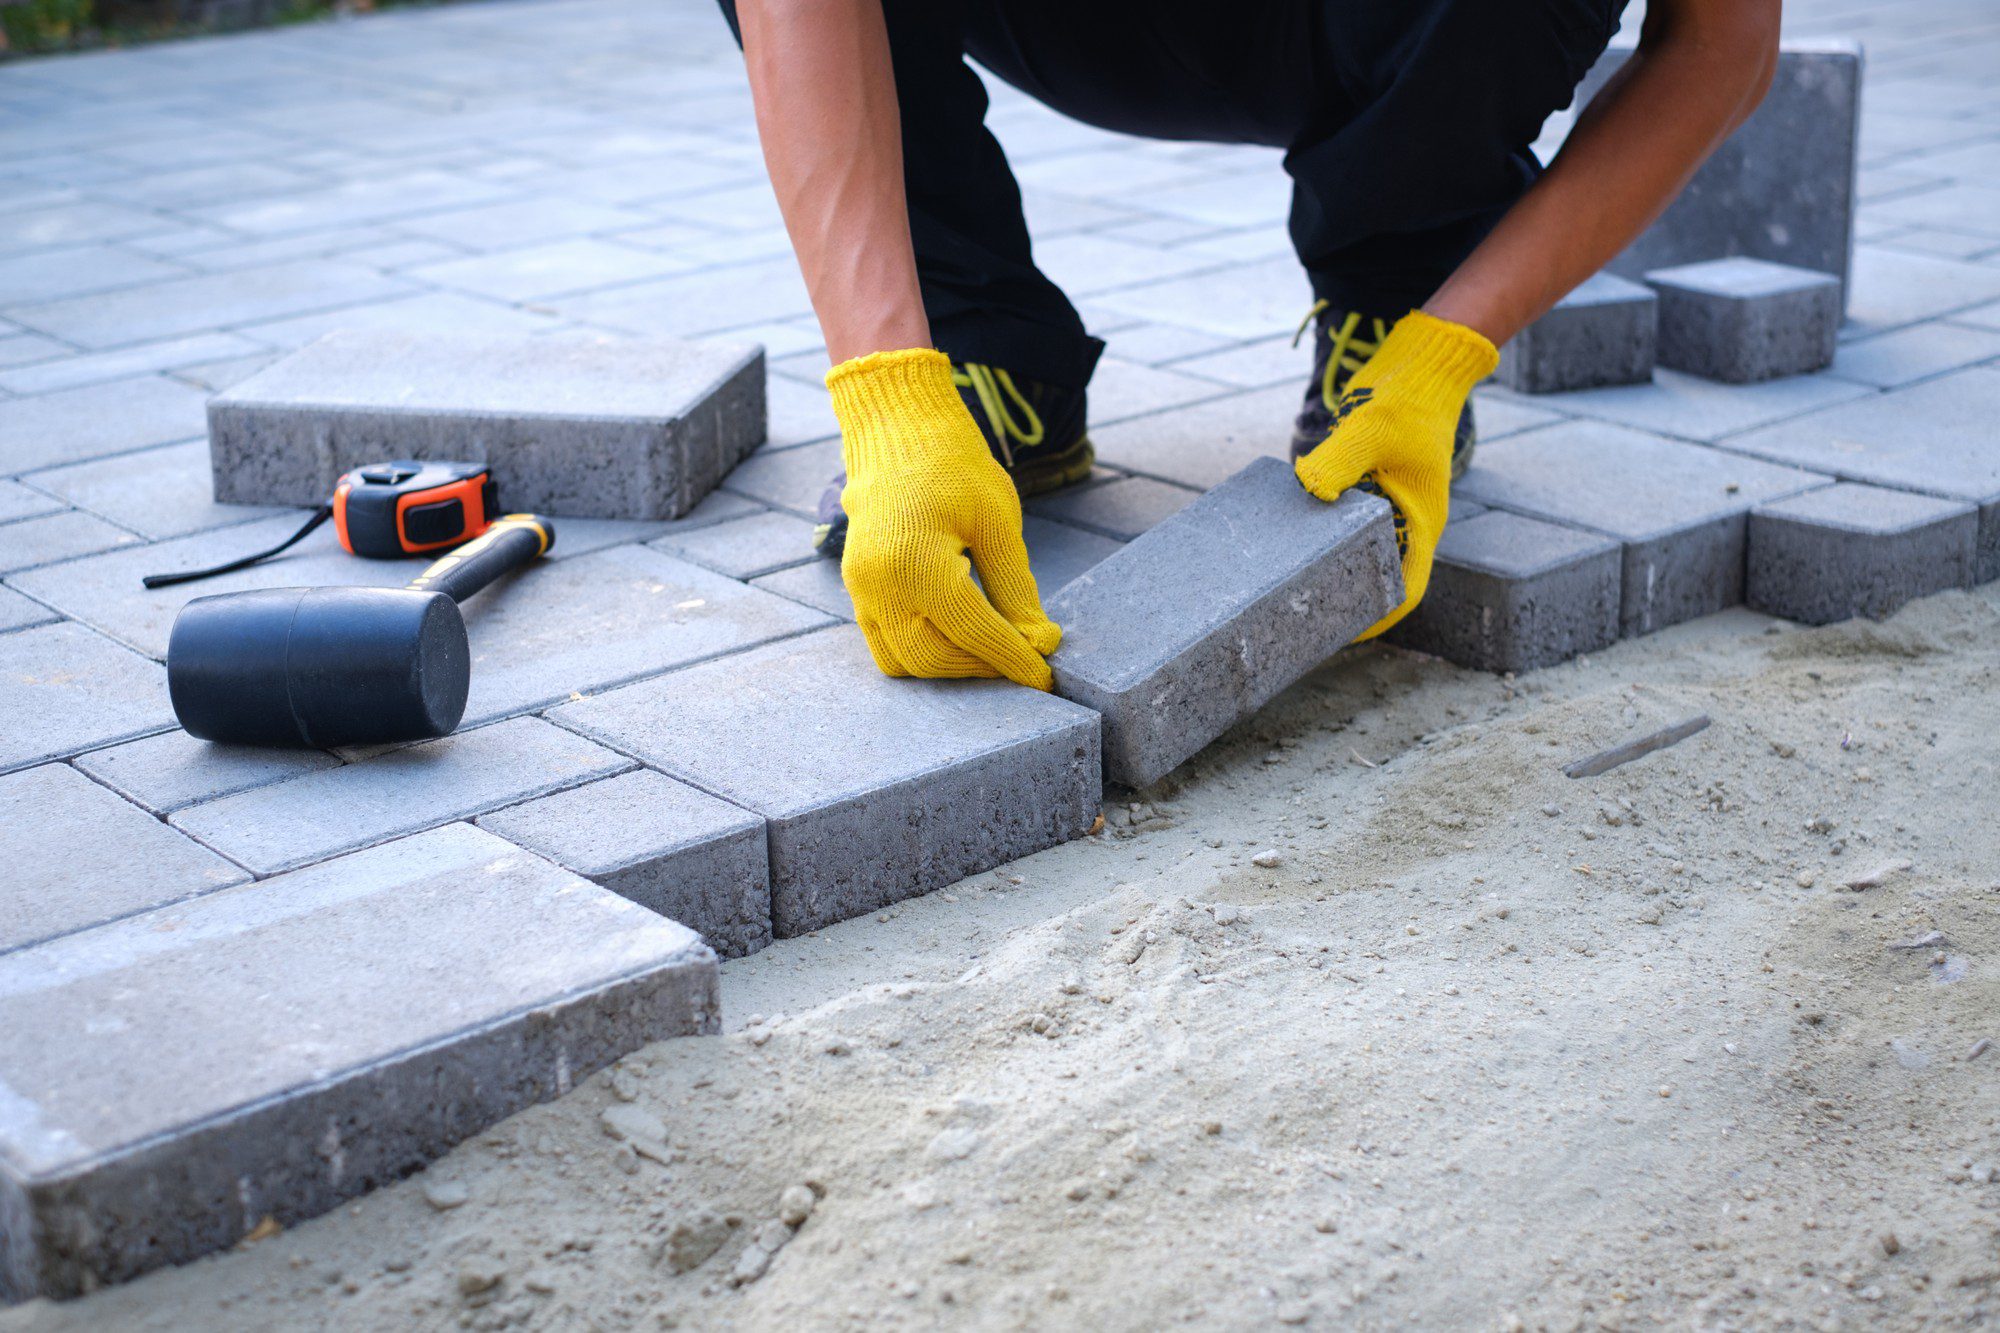 The image shows a person laying paving stones to create a pathway or patio. The individual is wearing yellow work gloves and seems to be in the process of placing a paver into the desired position. There is also a rubber mallet and a tape measure on top of the other pavers, tools commonly used in the process of laying pavers. The environment suggests outdoor construction or landscaping work.